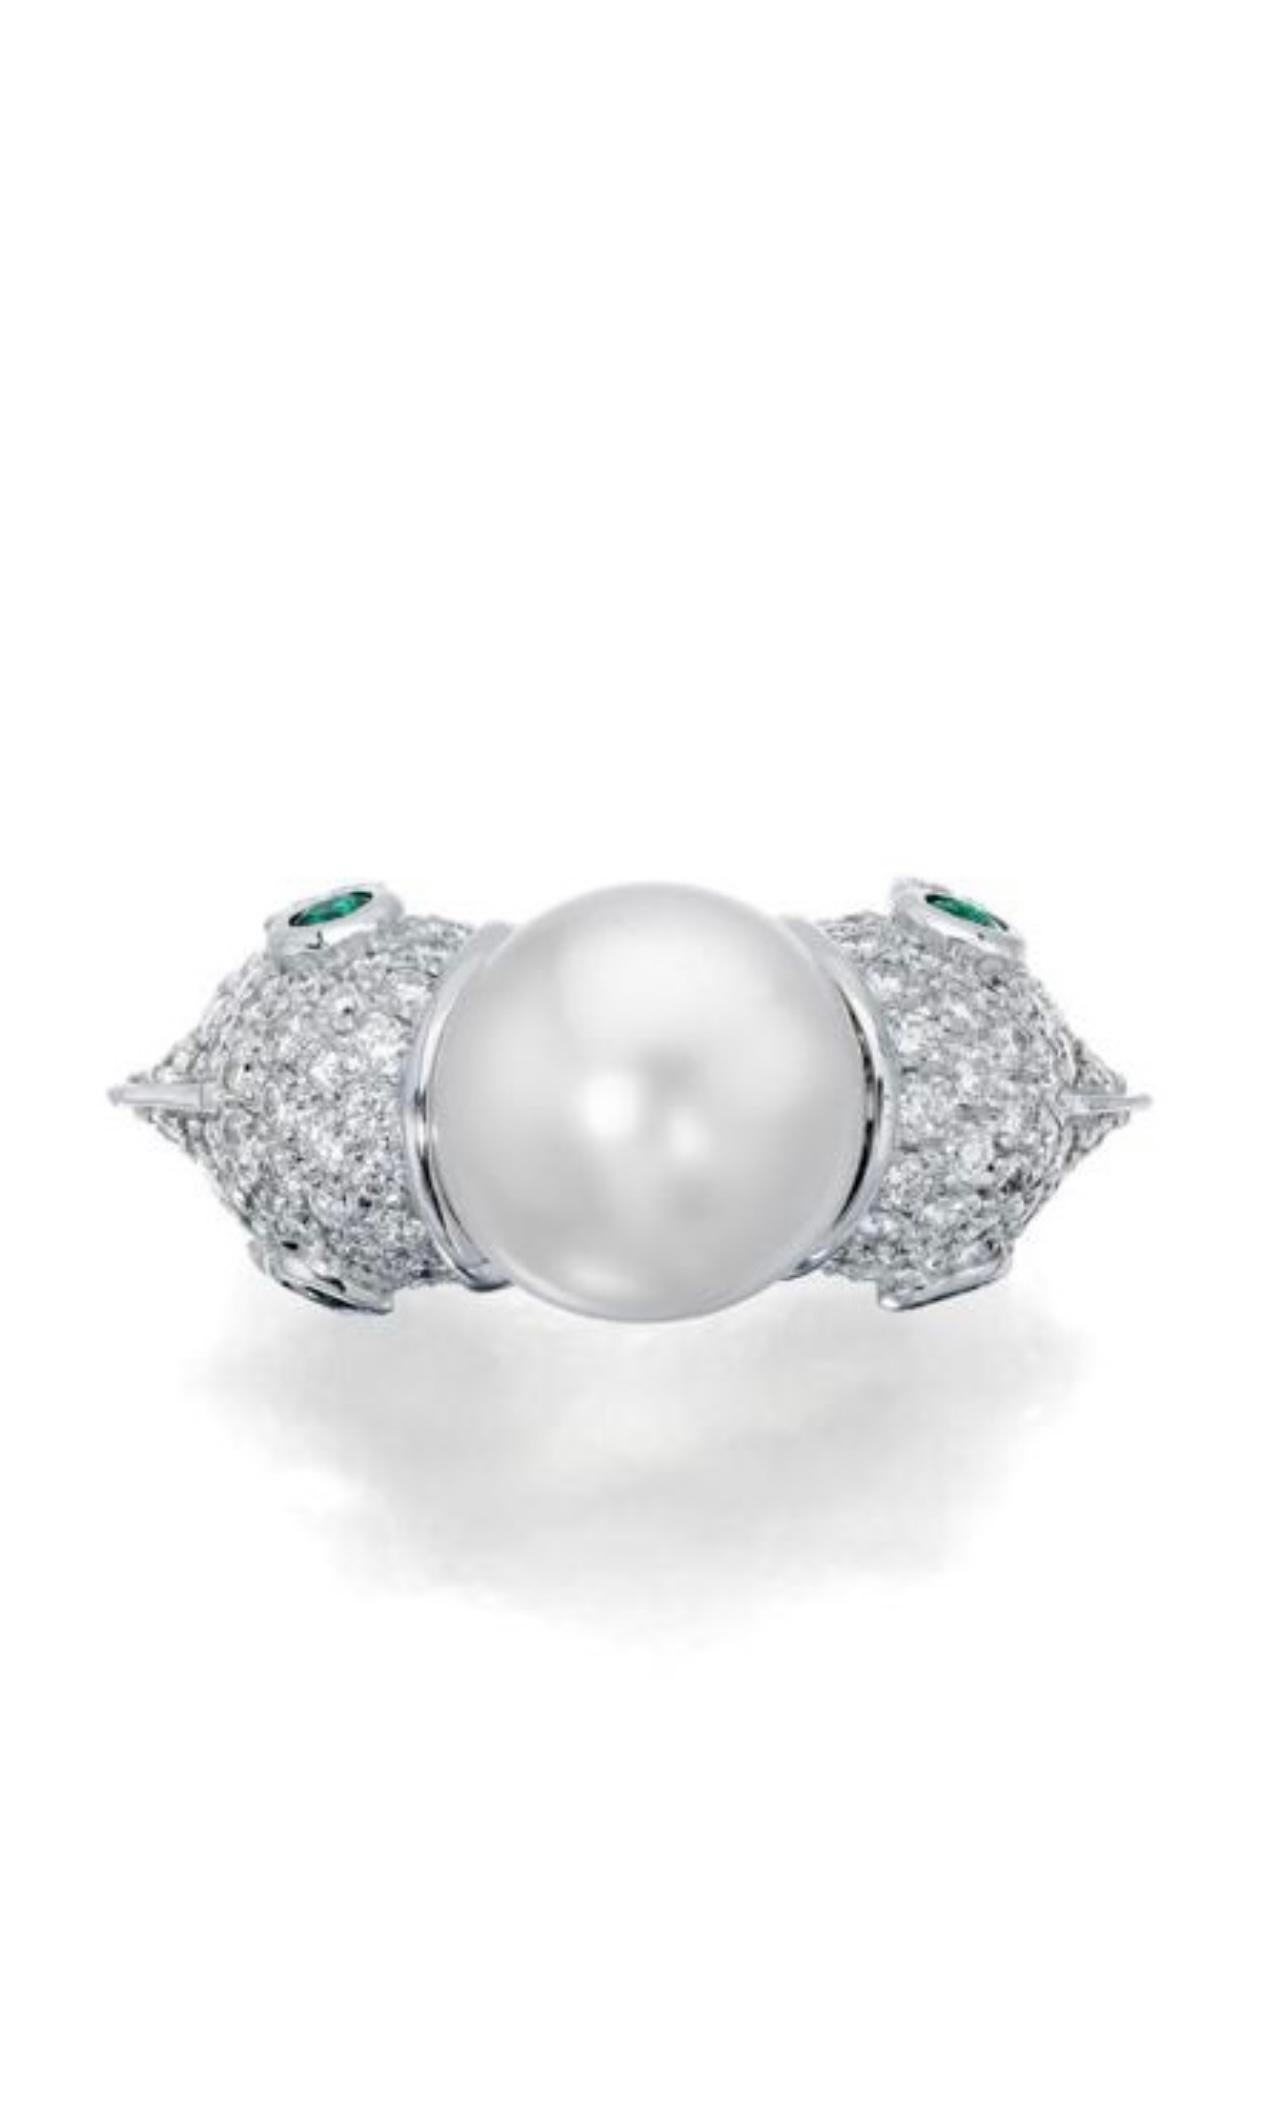 emerald and pearl engagement rings